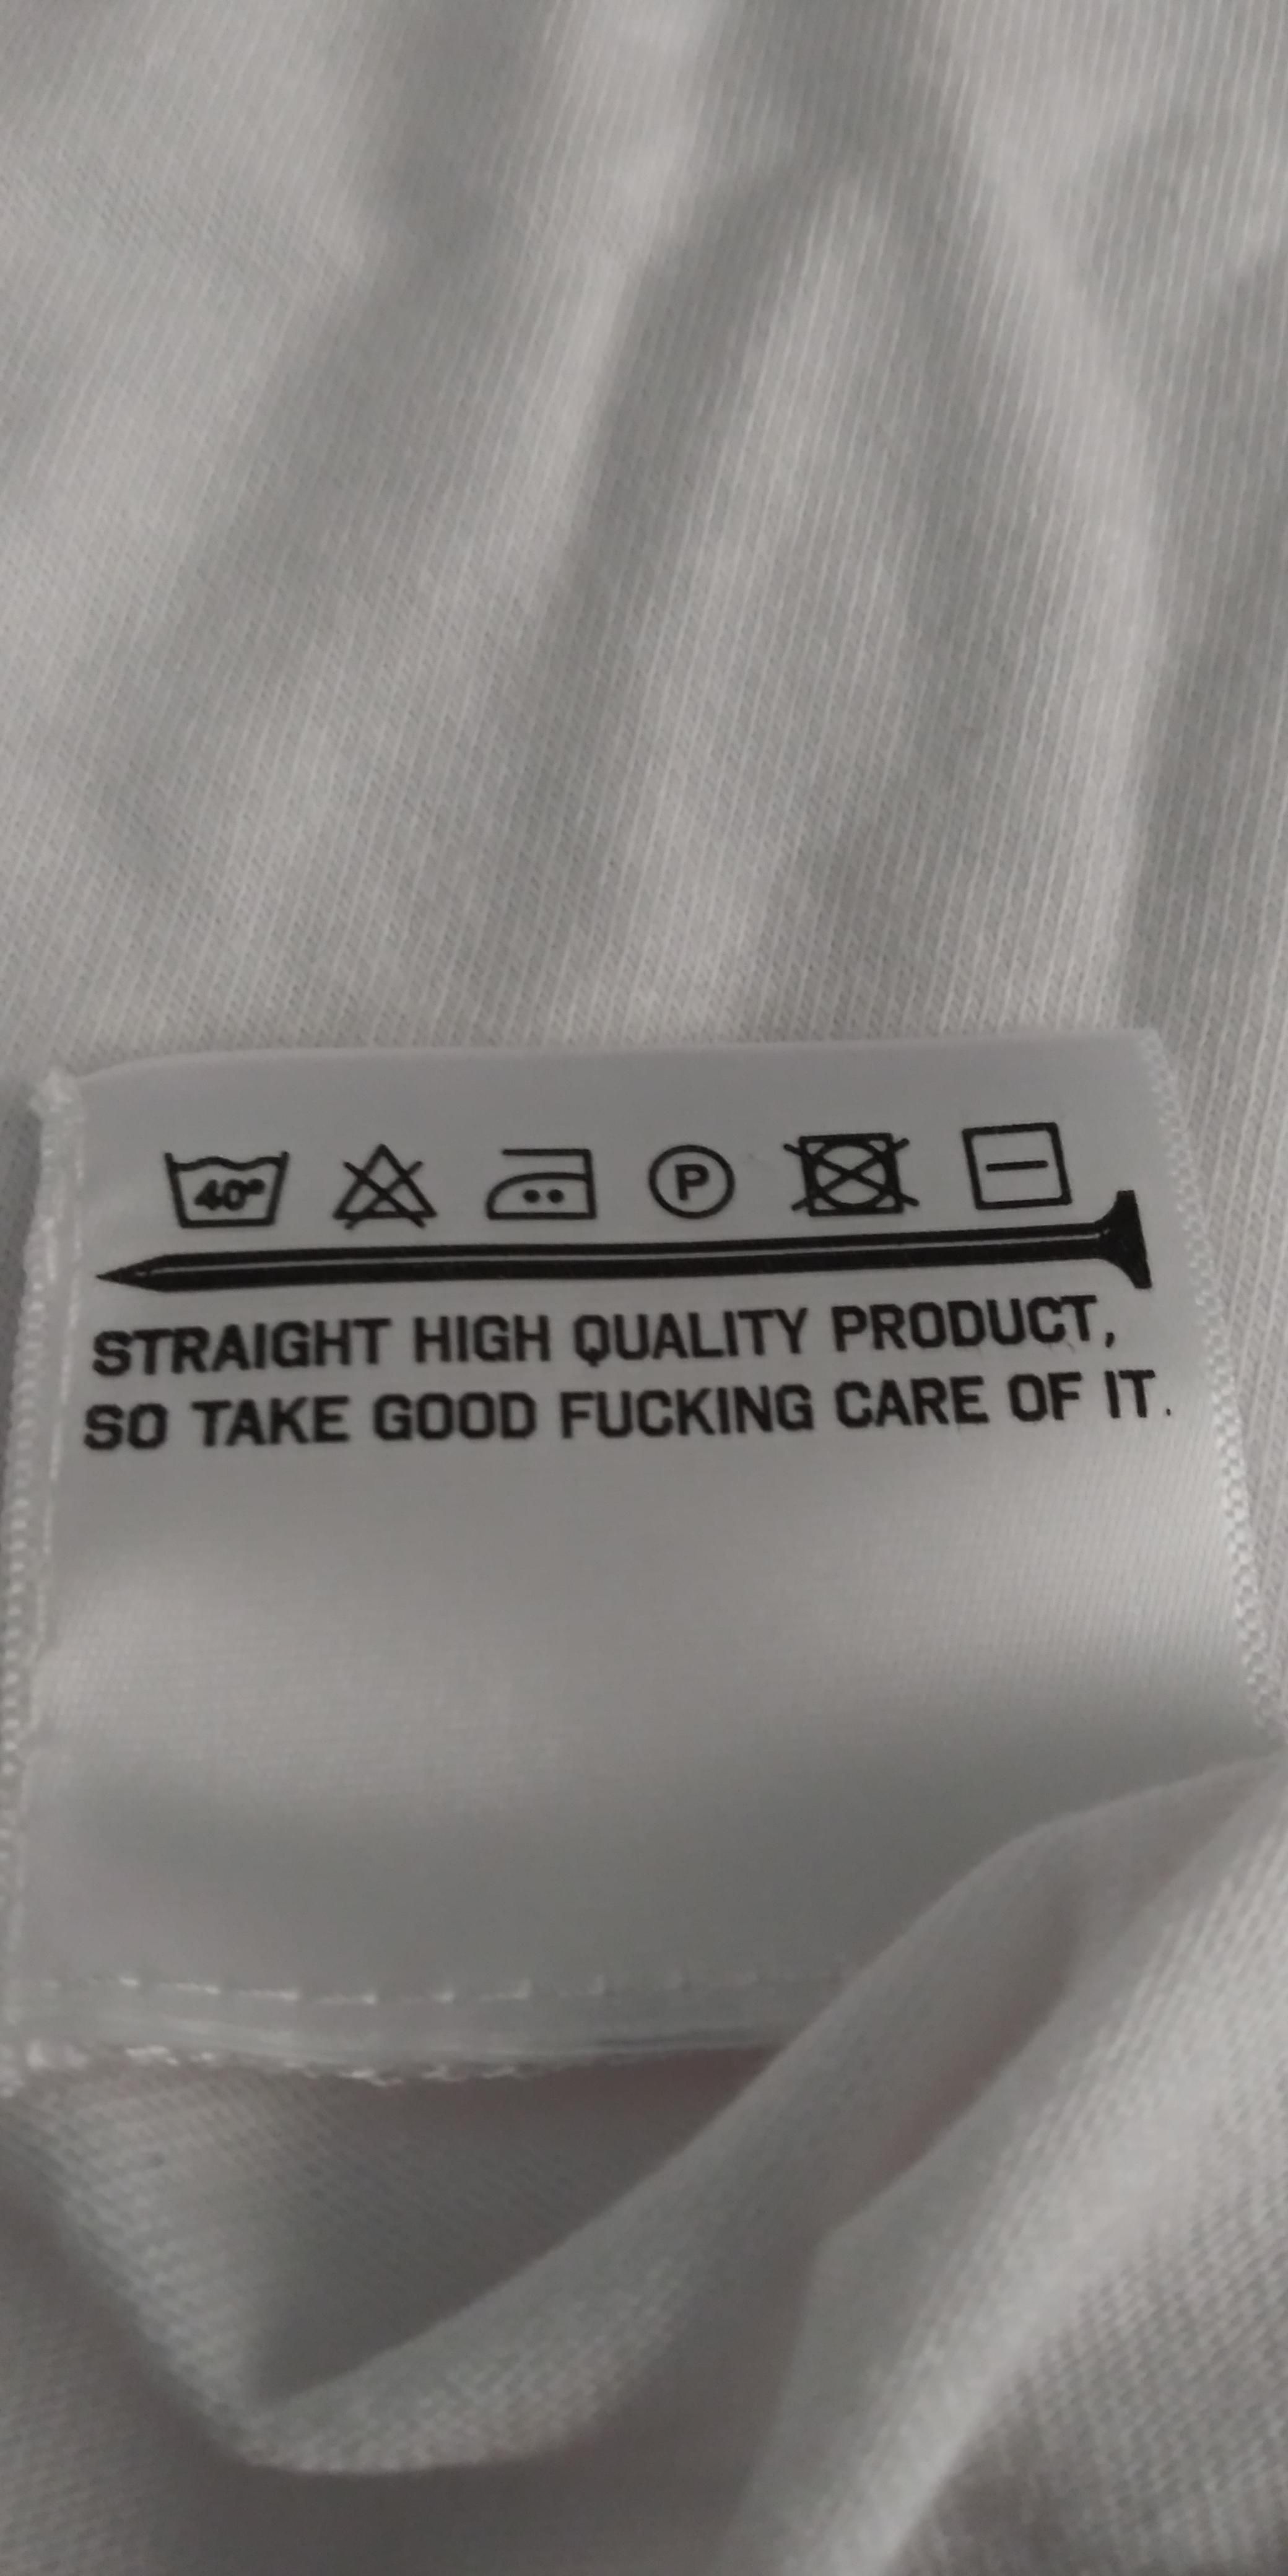 Got this shirt in the mail today, here's the tag